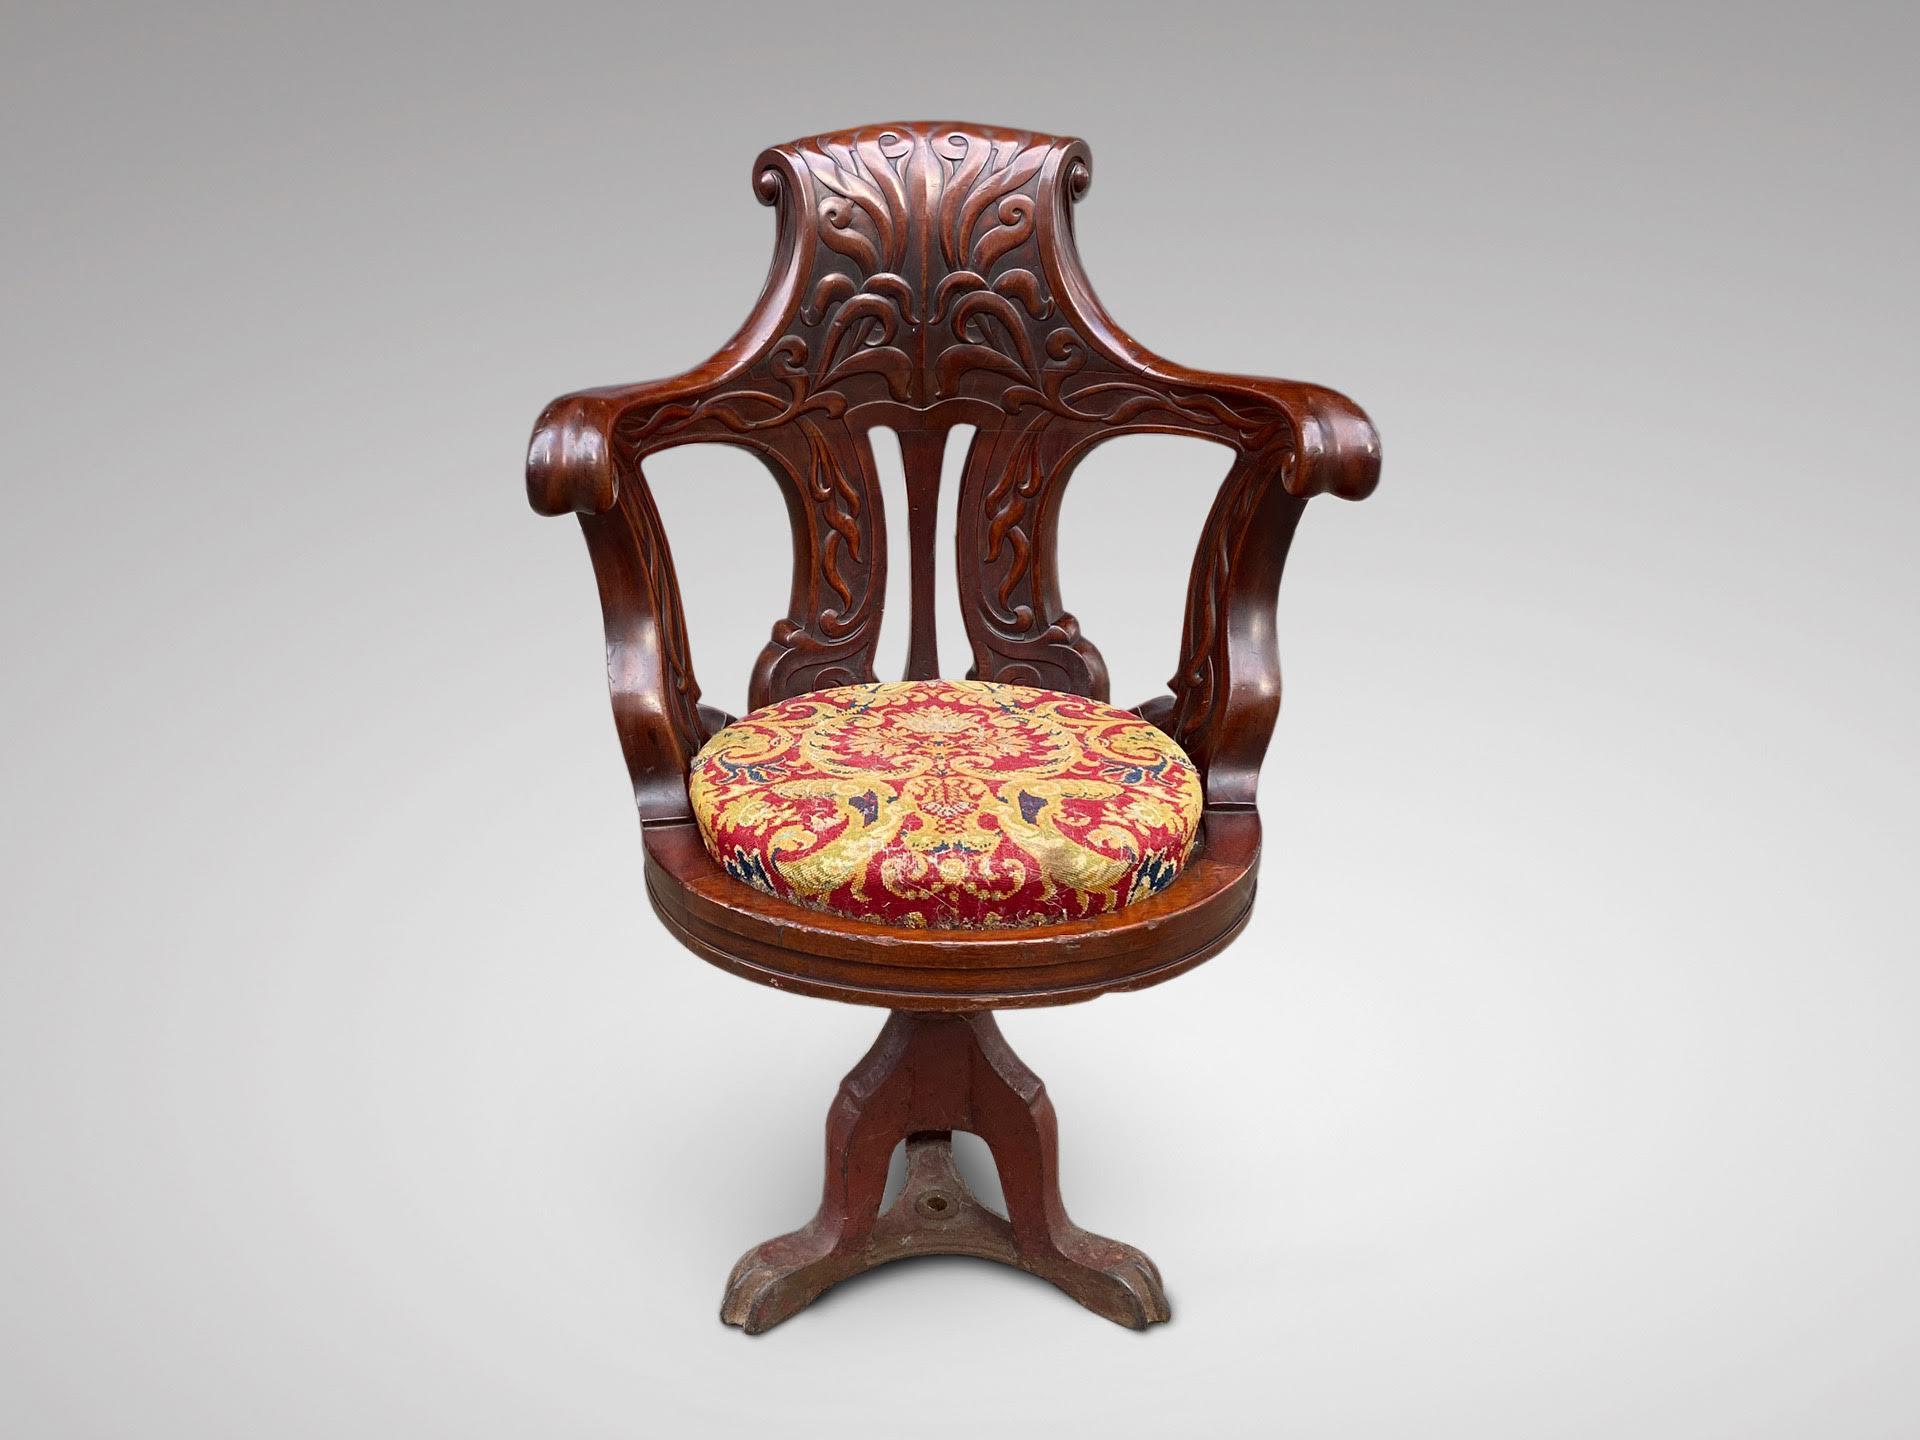 A beautiful carved mahogany dining chair, from the Second Class dining saloon from the White Star Line RMS Olympic, and identical to the ones that were on board of the sister ship the Titanic. It is made from mahogany, carved in the Art Nouveau